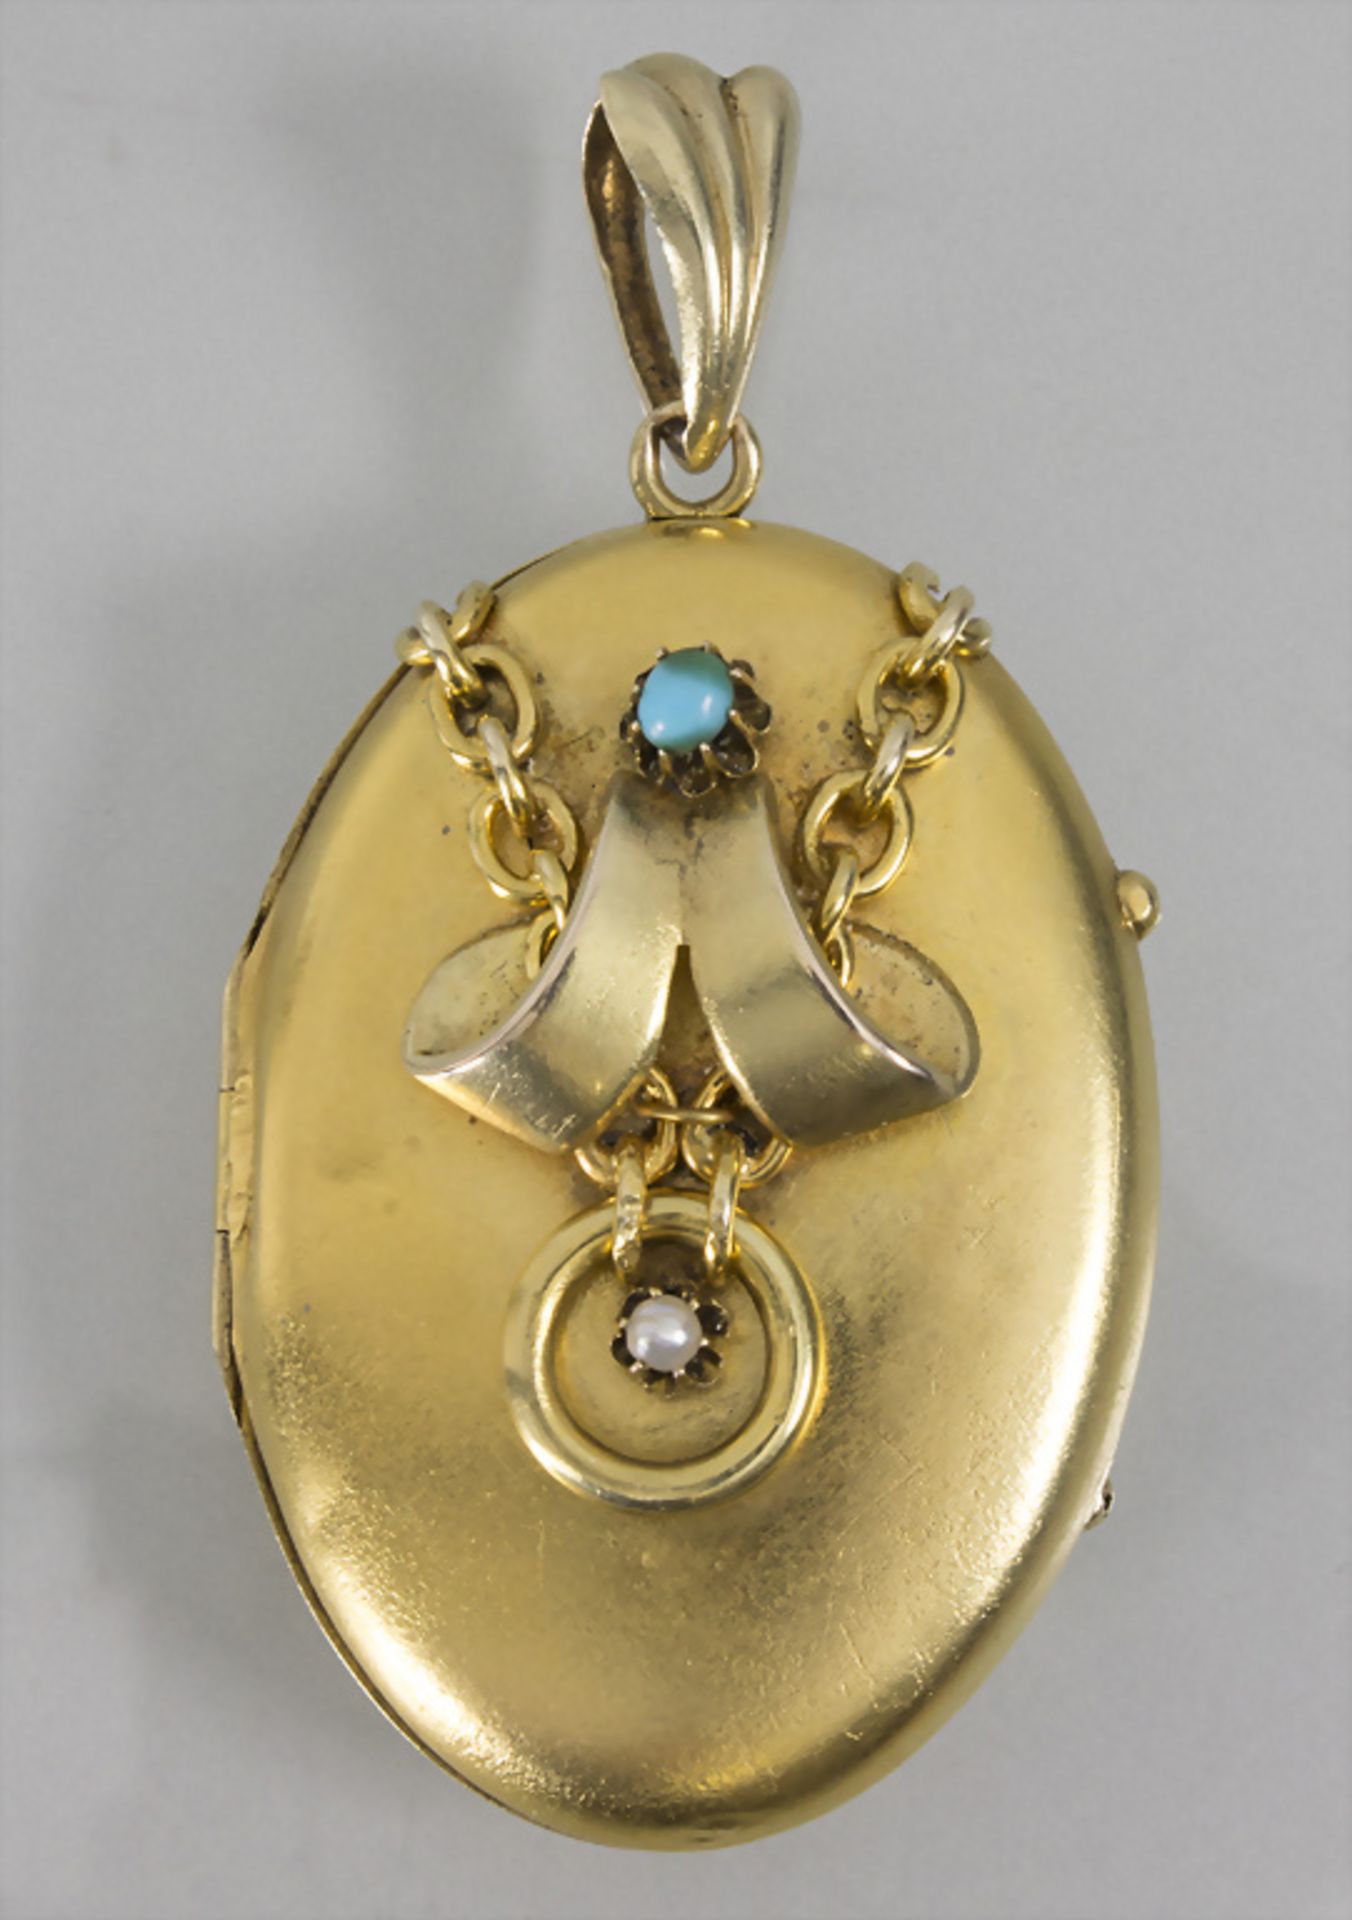 Medaillon mit Türkis und Perle / A medaillon with turquoise and pearls, 19. Jh.